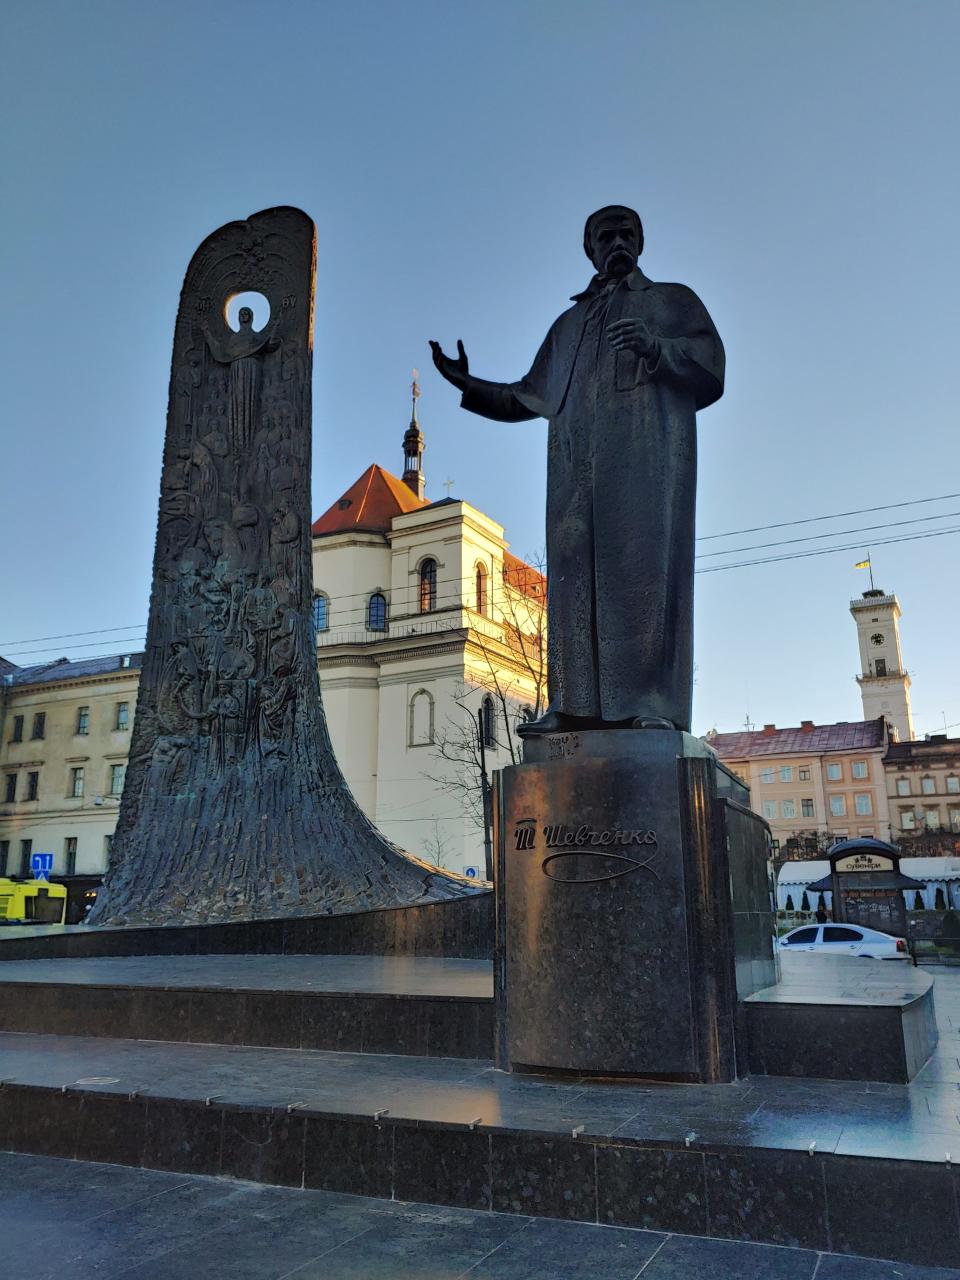 The Taras Shevchenko Monument that memorializes the namesake Ukrainian poet and nationalist stands in the heart of the city of Lviv, Ukraine on the morning of Oct. 21, 2022. There is also a memorial to Shevchenko at the National Mall and Memorial Parks in Washington, D.C., erected in 1964 to commemorate the 150th anniversary of Shevchenko's birth. The 19th century artist spent many years imprisoned by tsarist Russian authorities because of his pro-Ukrainian independence activities, according to the National Park Service.